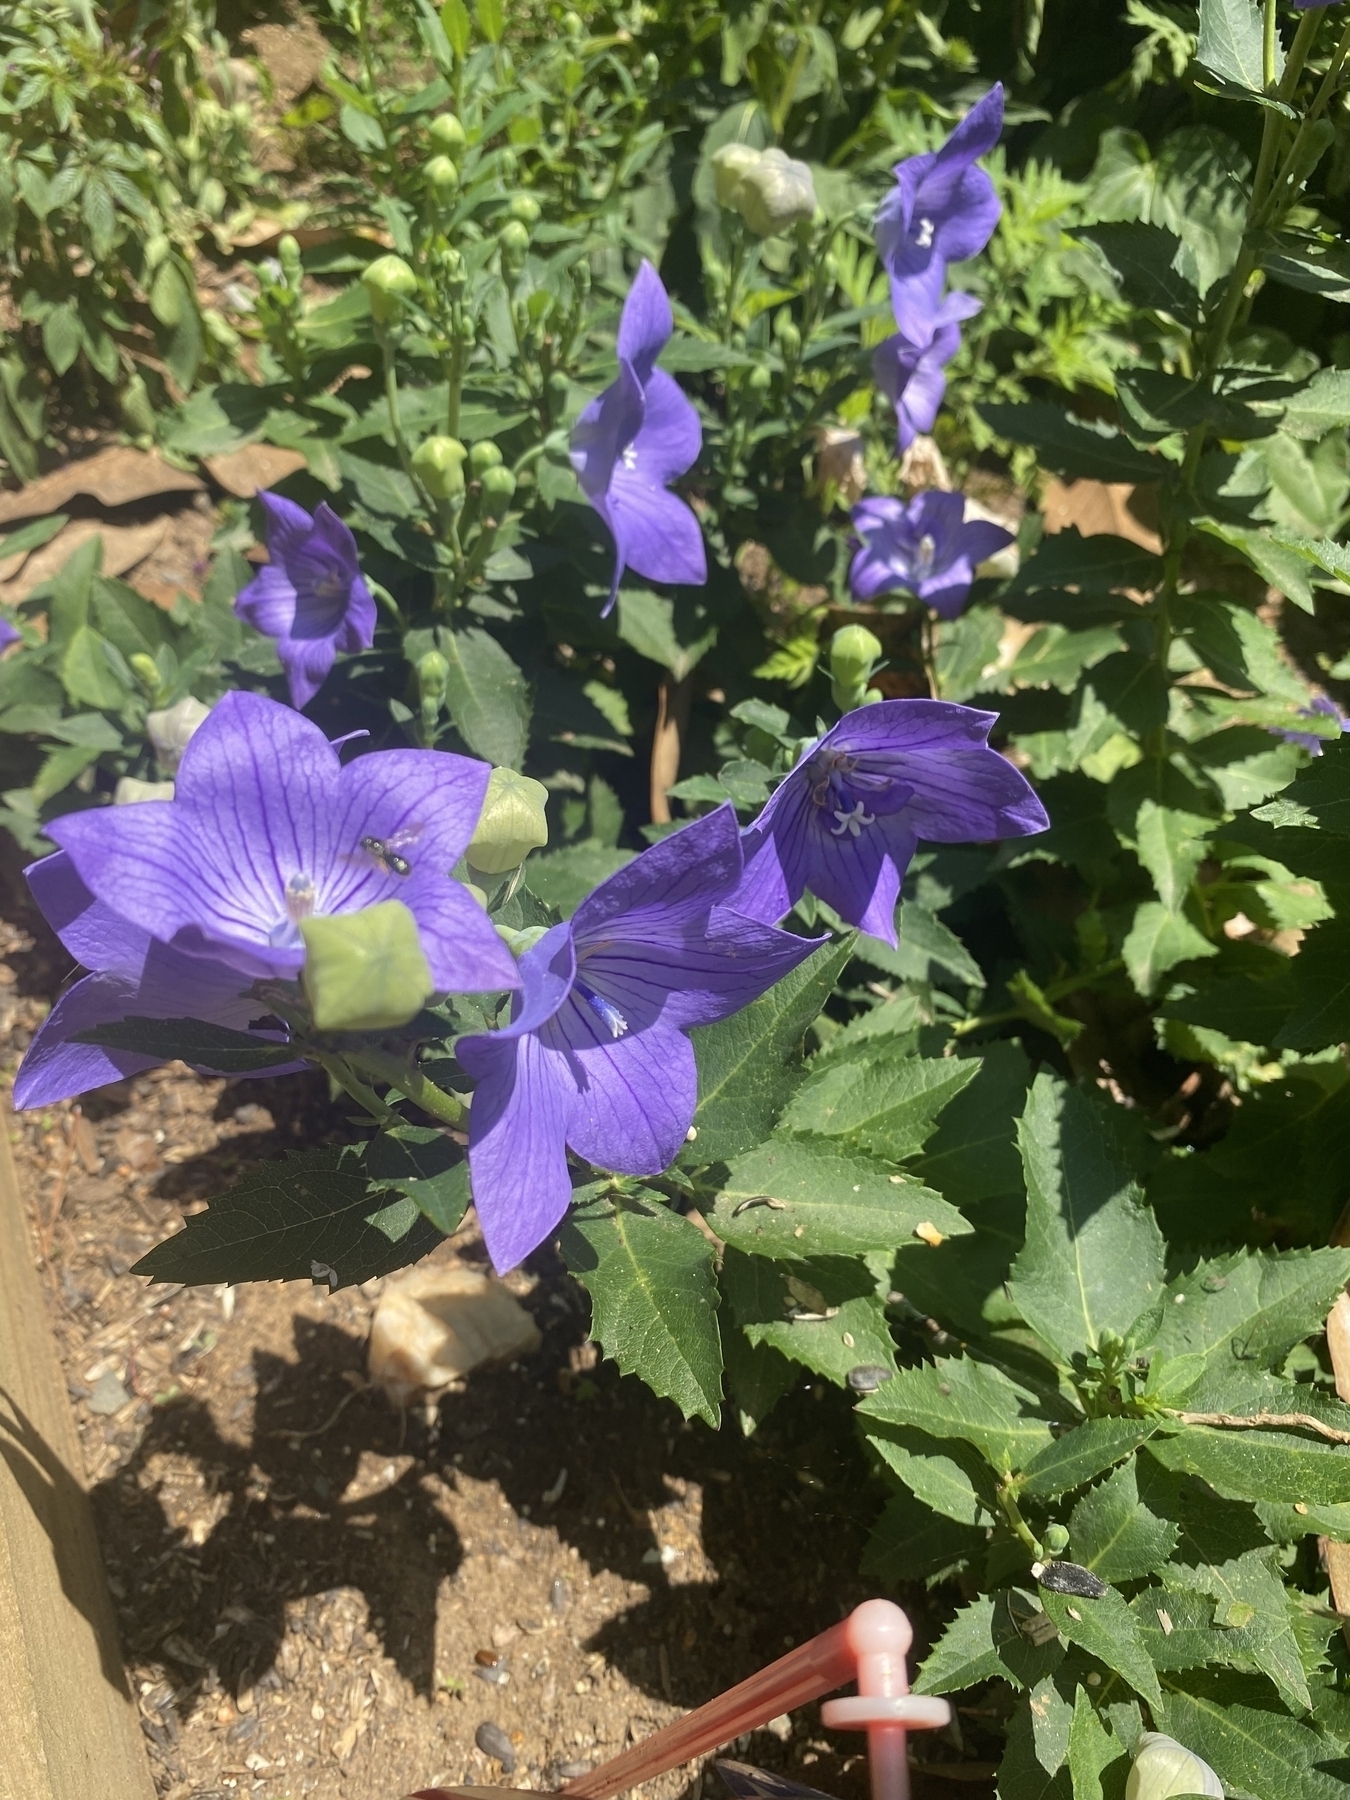 Picture of a purple flower. My wife called them balloon flowers.